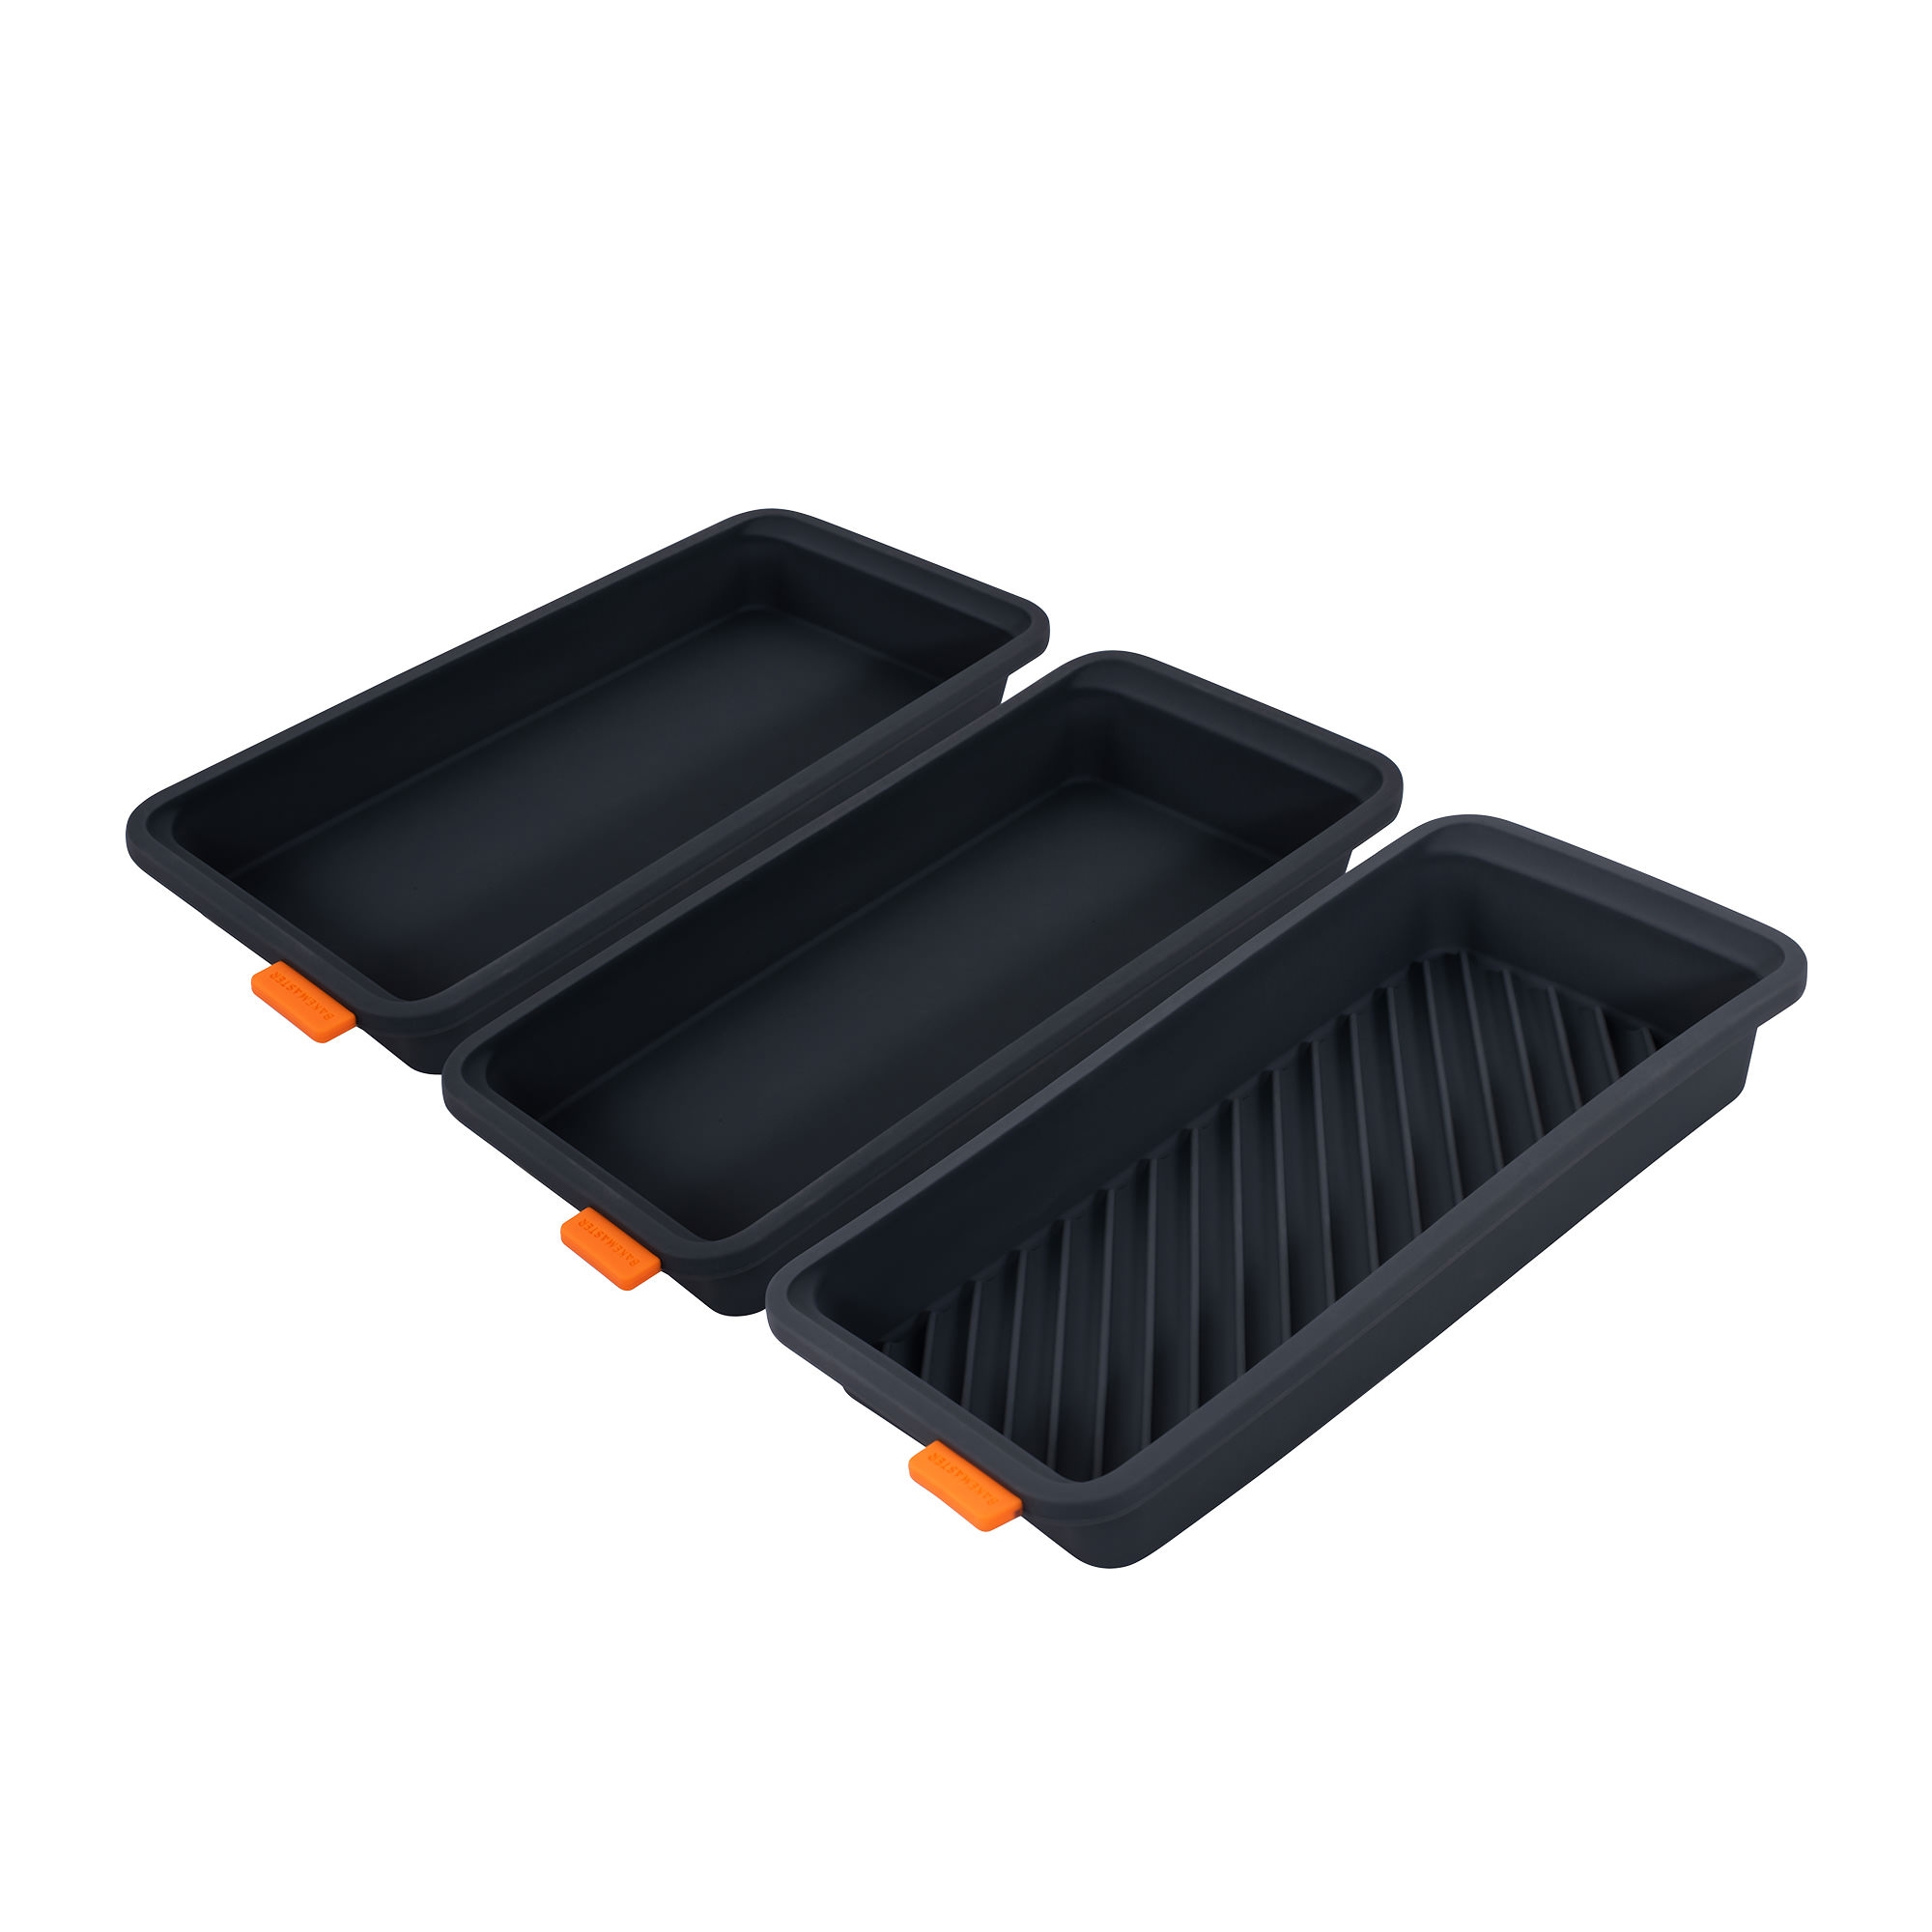 Bakemaster Reinforced Silicone Divider Trays 28x13cm Set of 3 Image 1